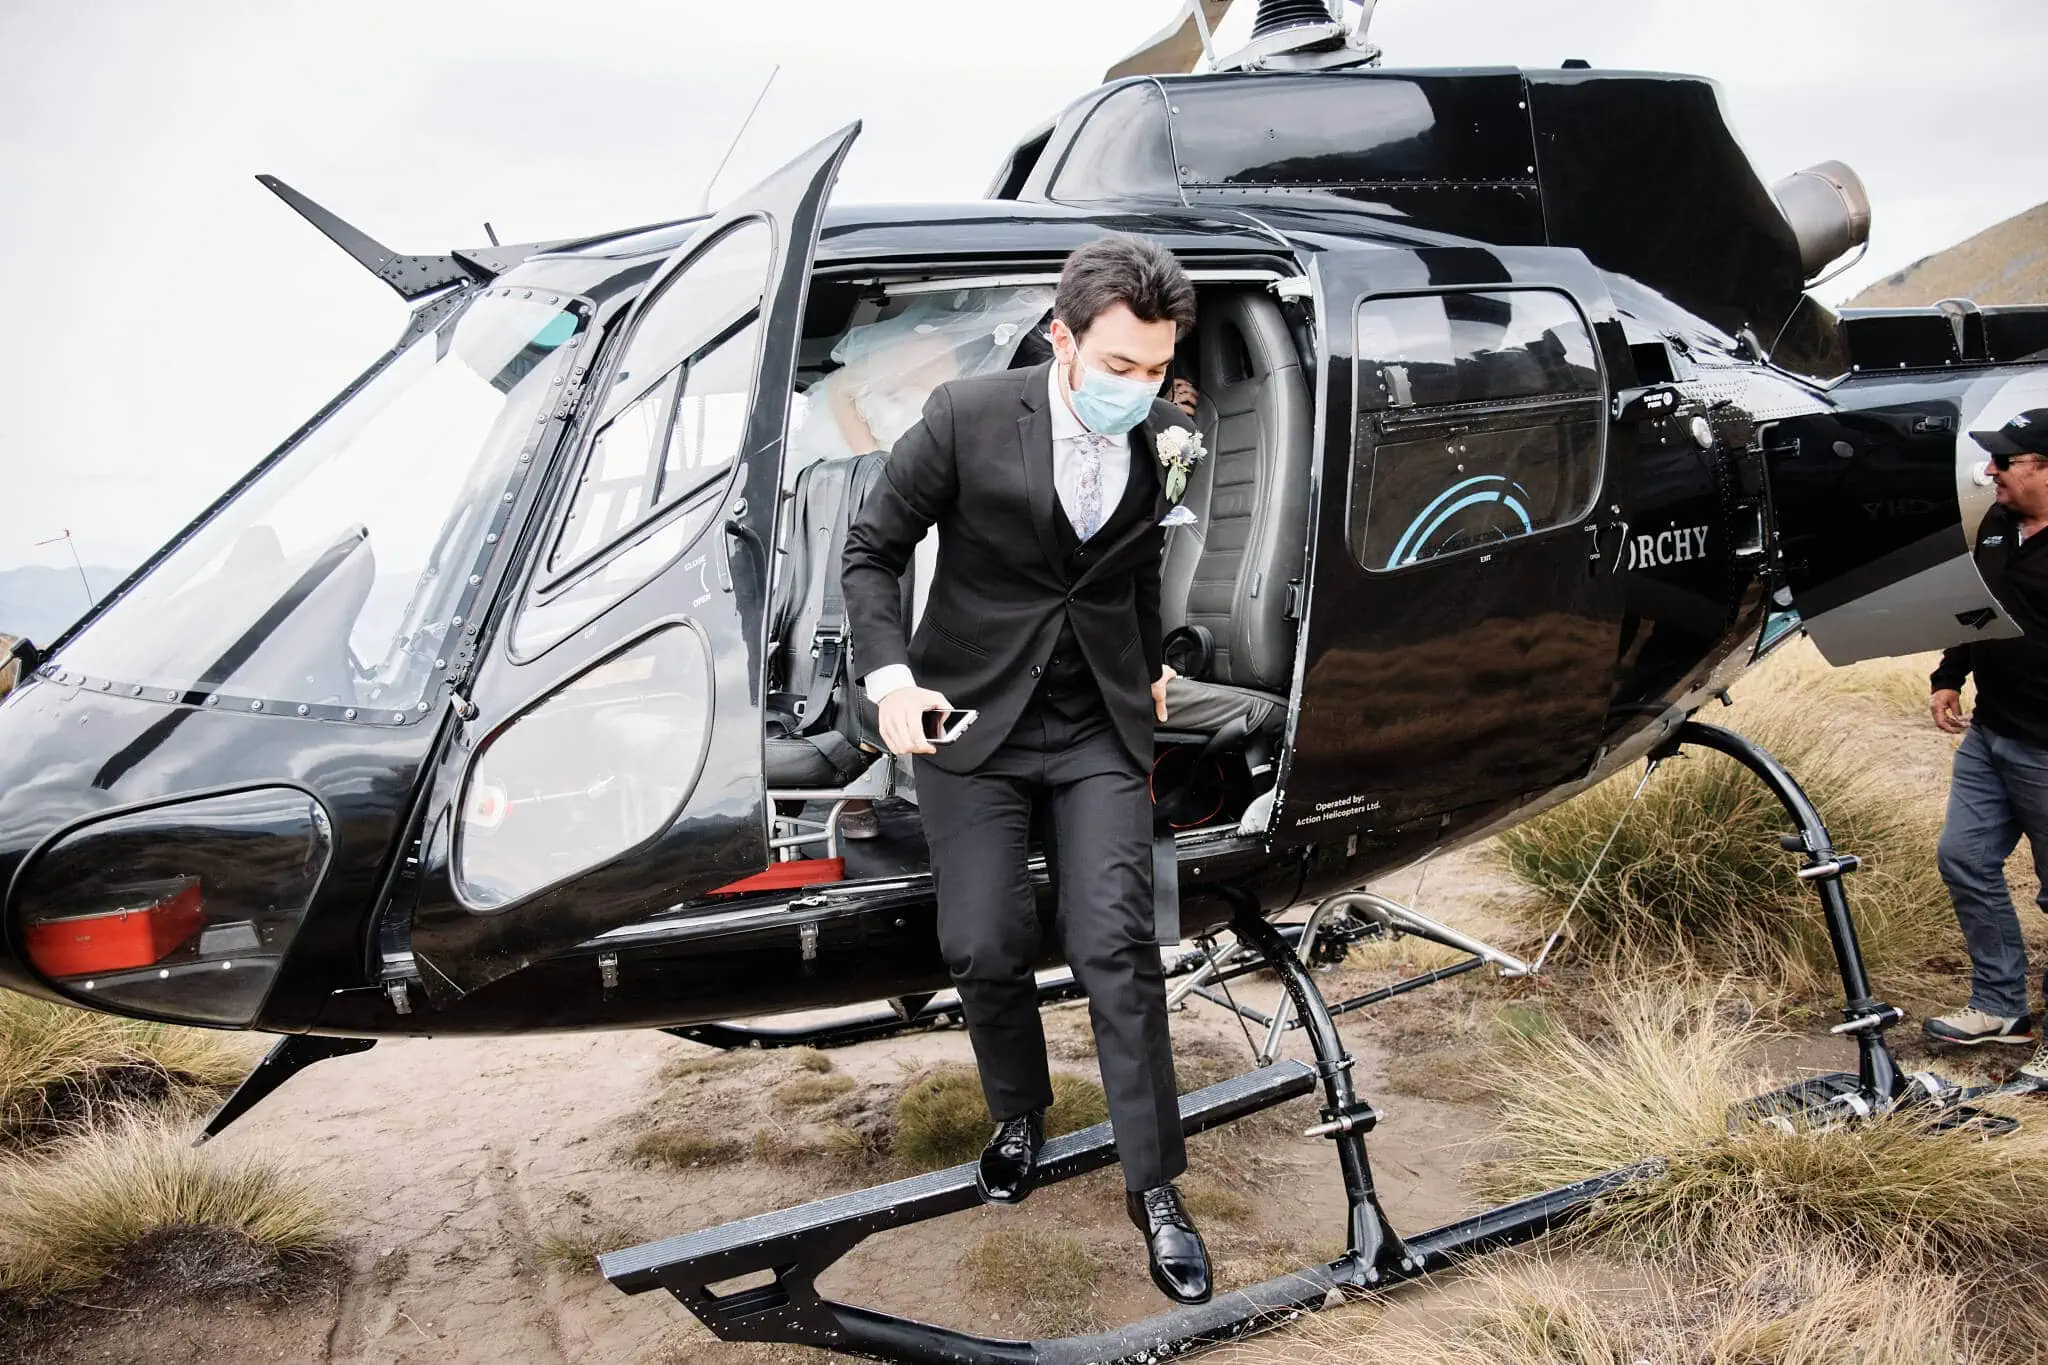 Carlos is disembarking from a helicopter at Cecil Peak, making his intimate elopement wedding with Wanzhu even more memorable.